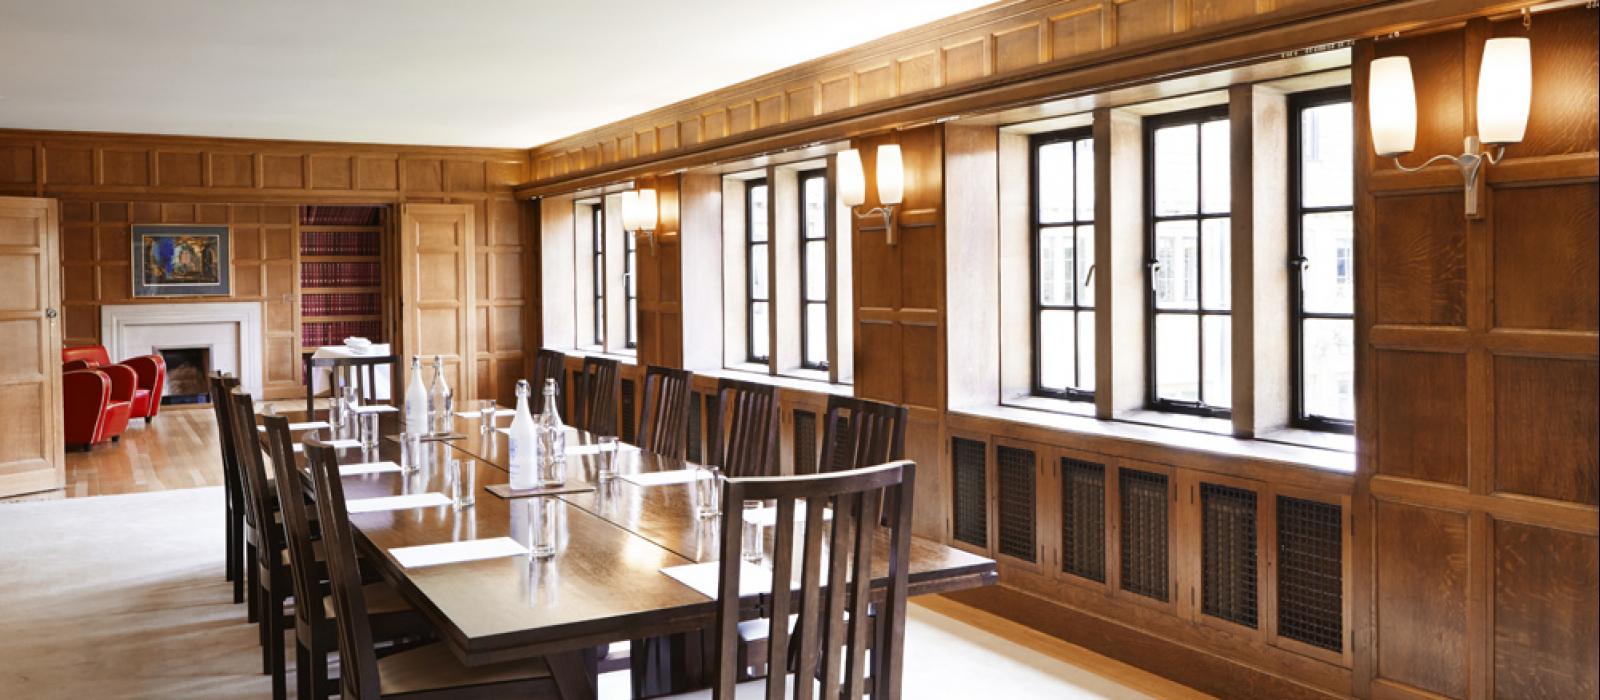 Chester Room, Nuffield College